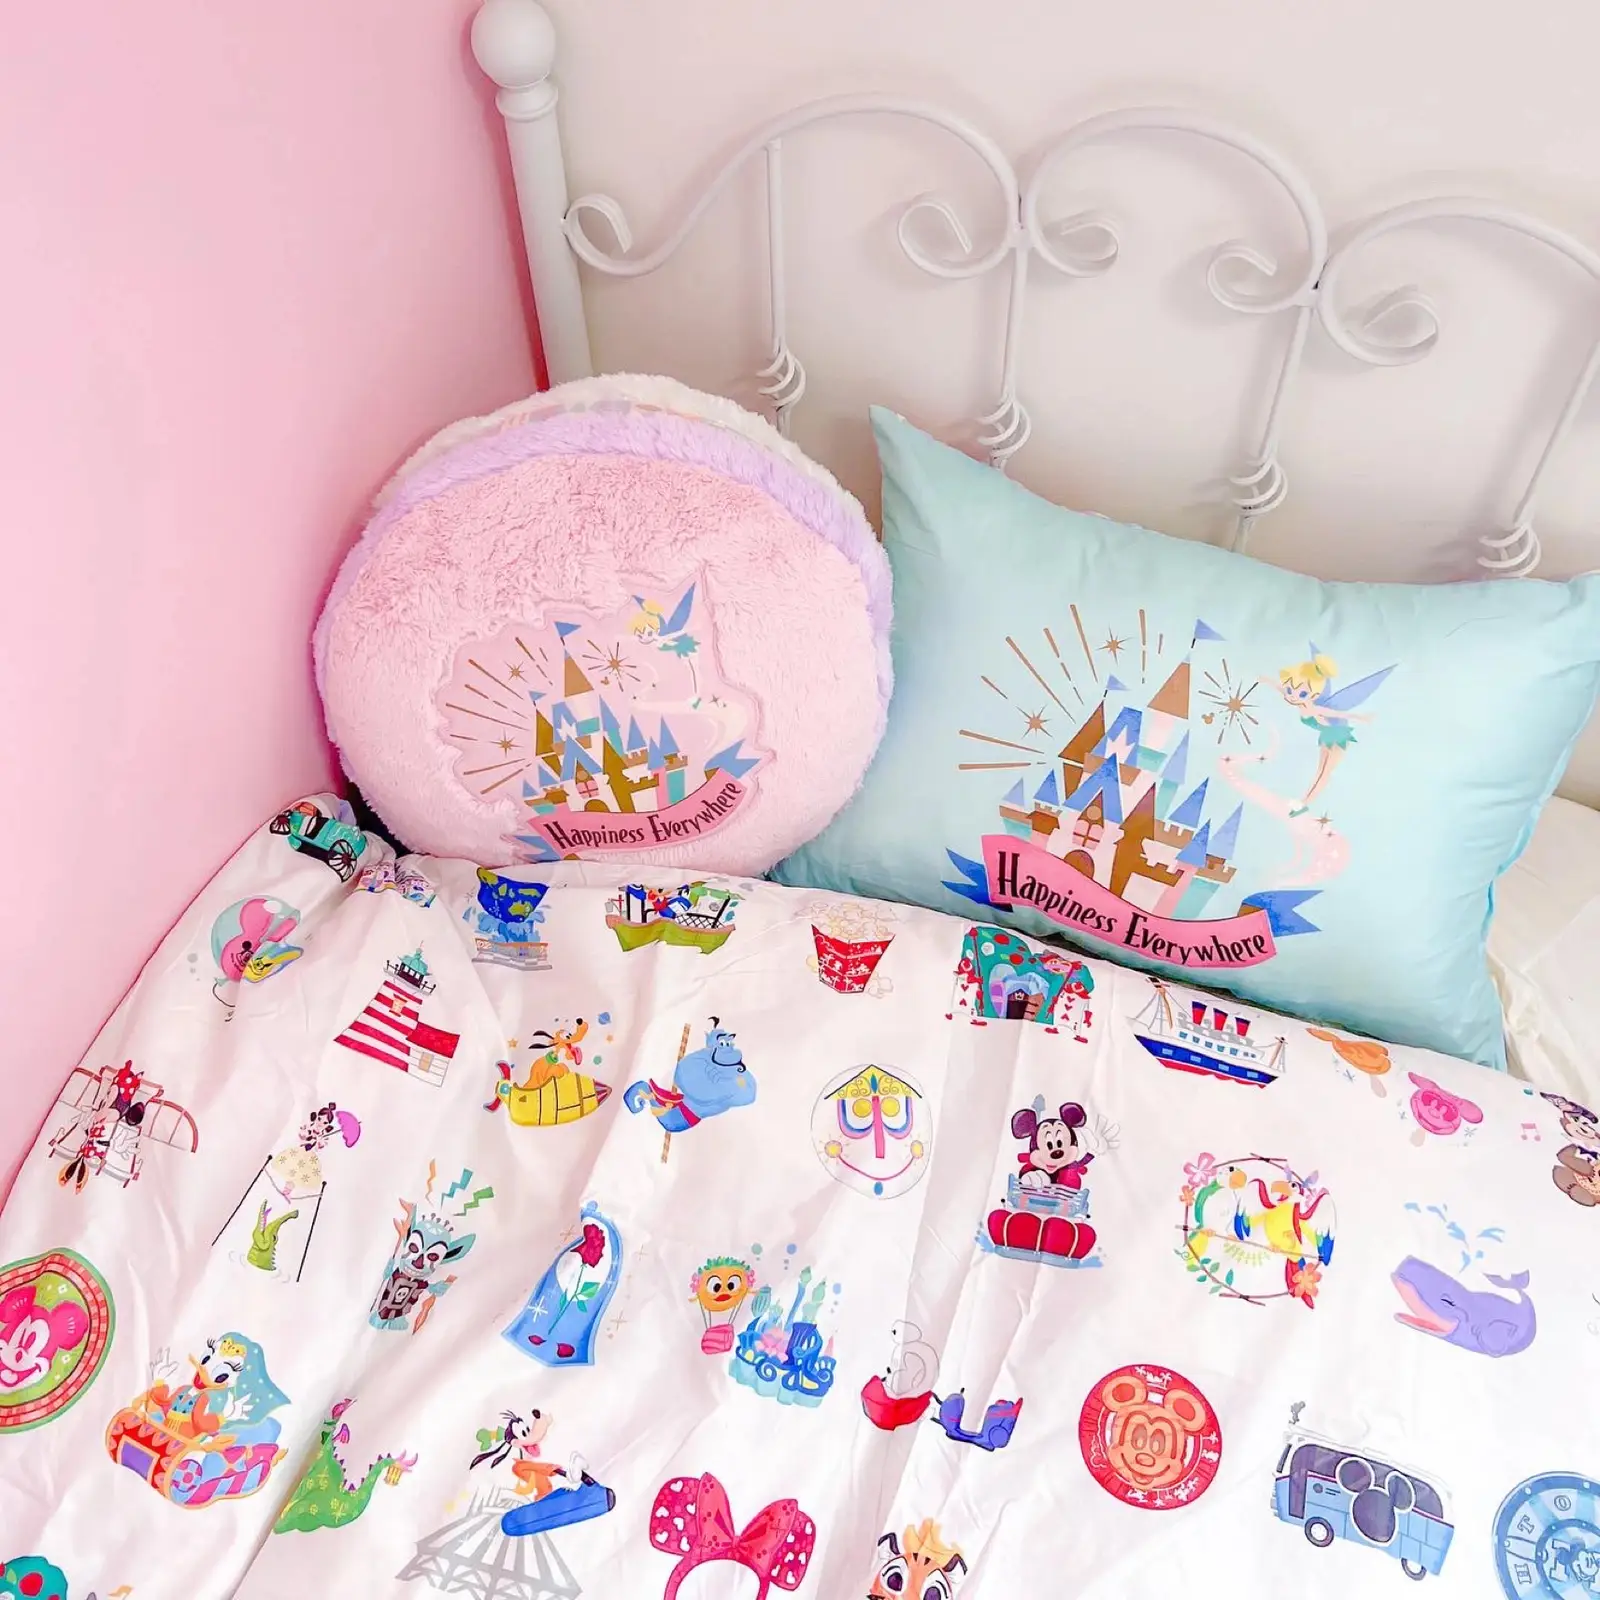 Happiest Place on Earth Pillow Covers, Disney Pillow Covers